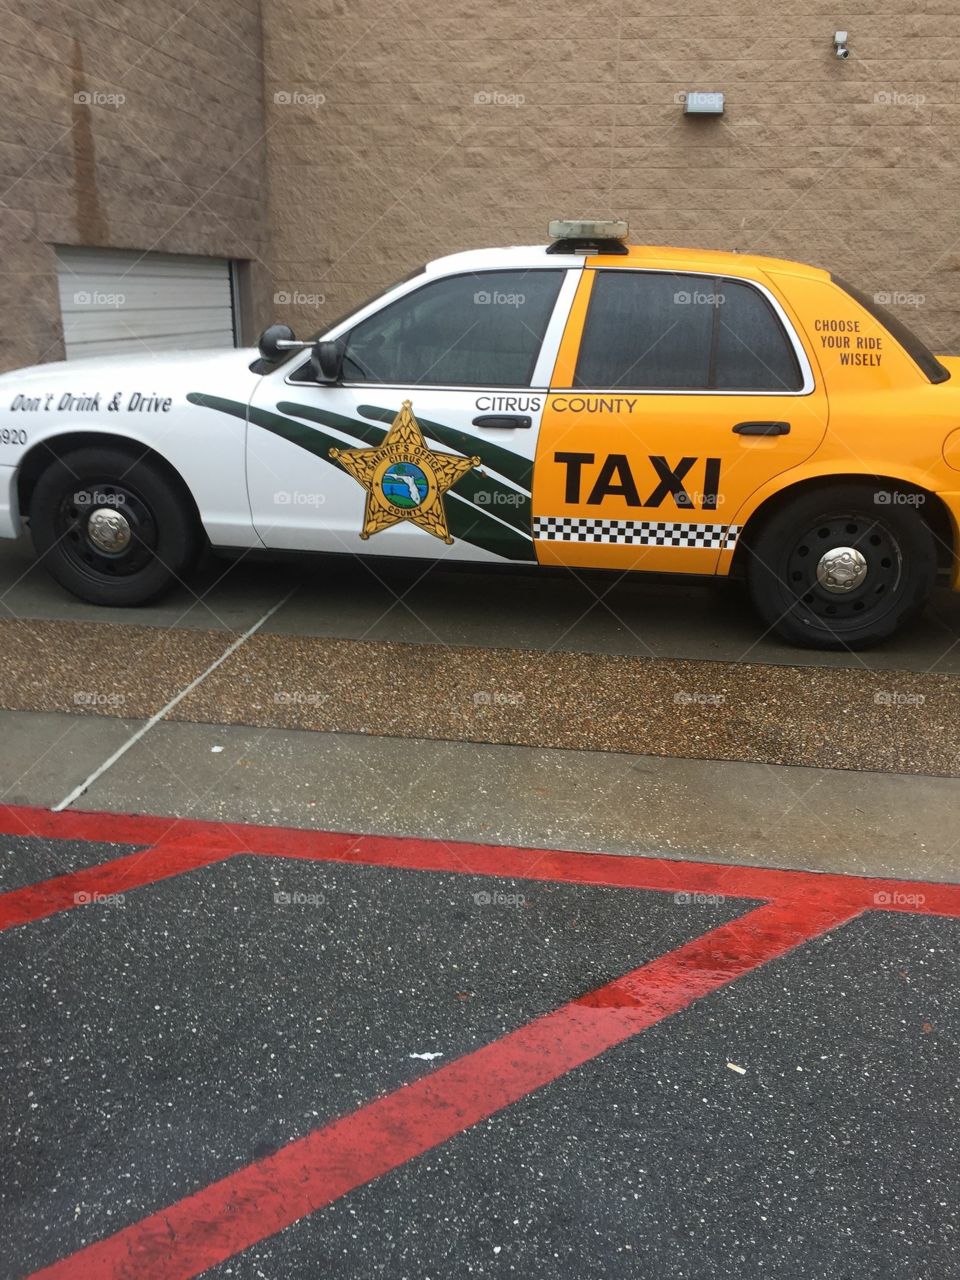 Which ride would you like to take hmmm I say taxi cab....